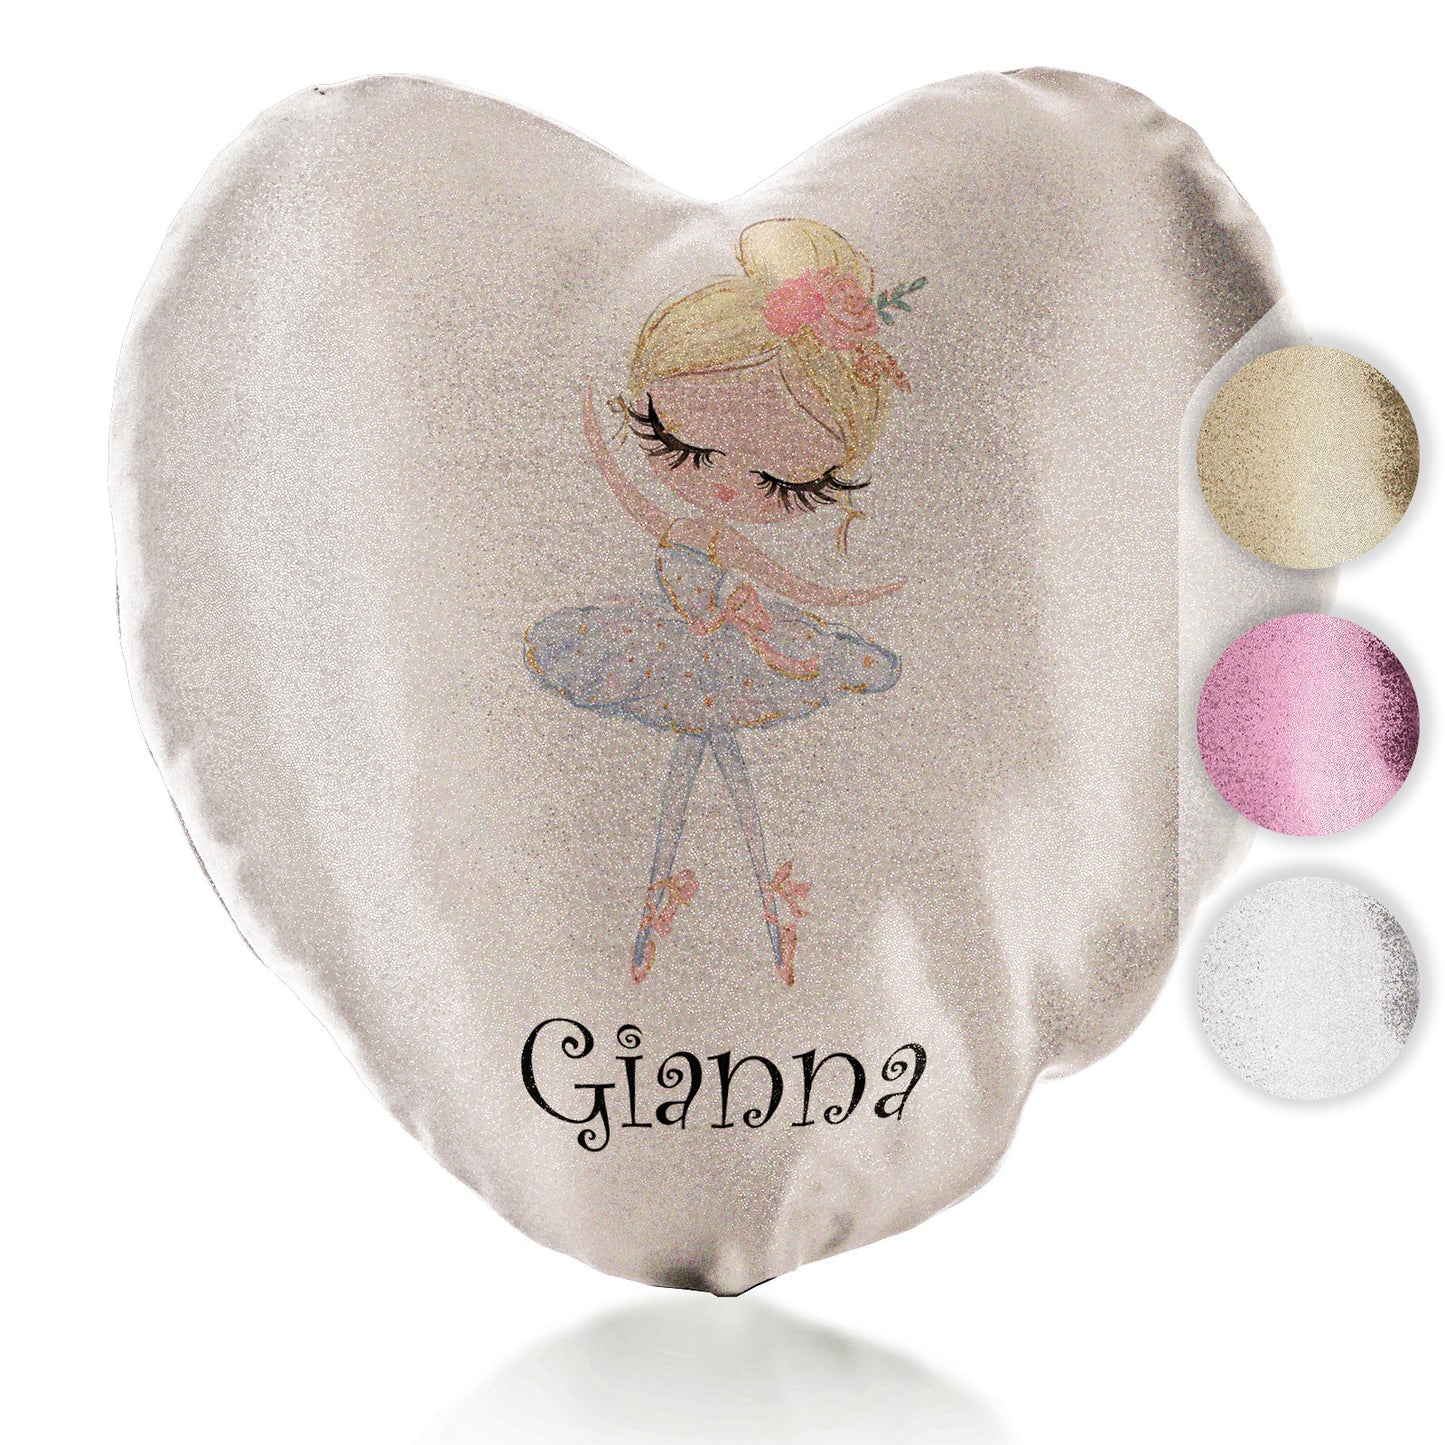 Personalised Glitter Heart Cushion with Cute Text and Blonde Hair White Dress Ballerina